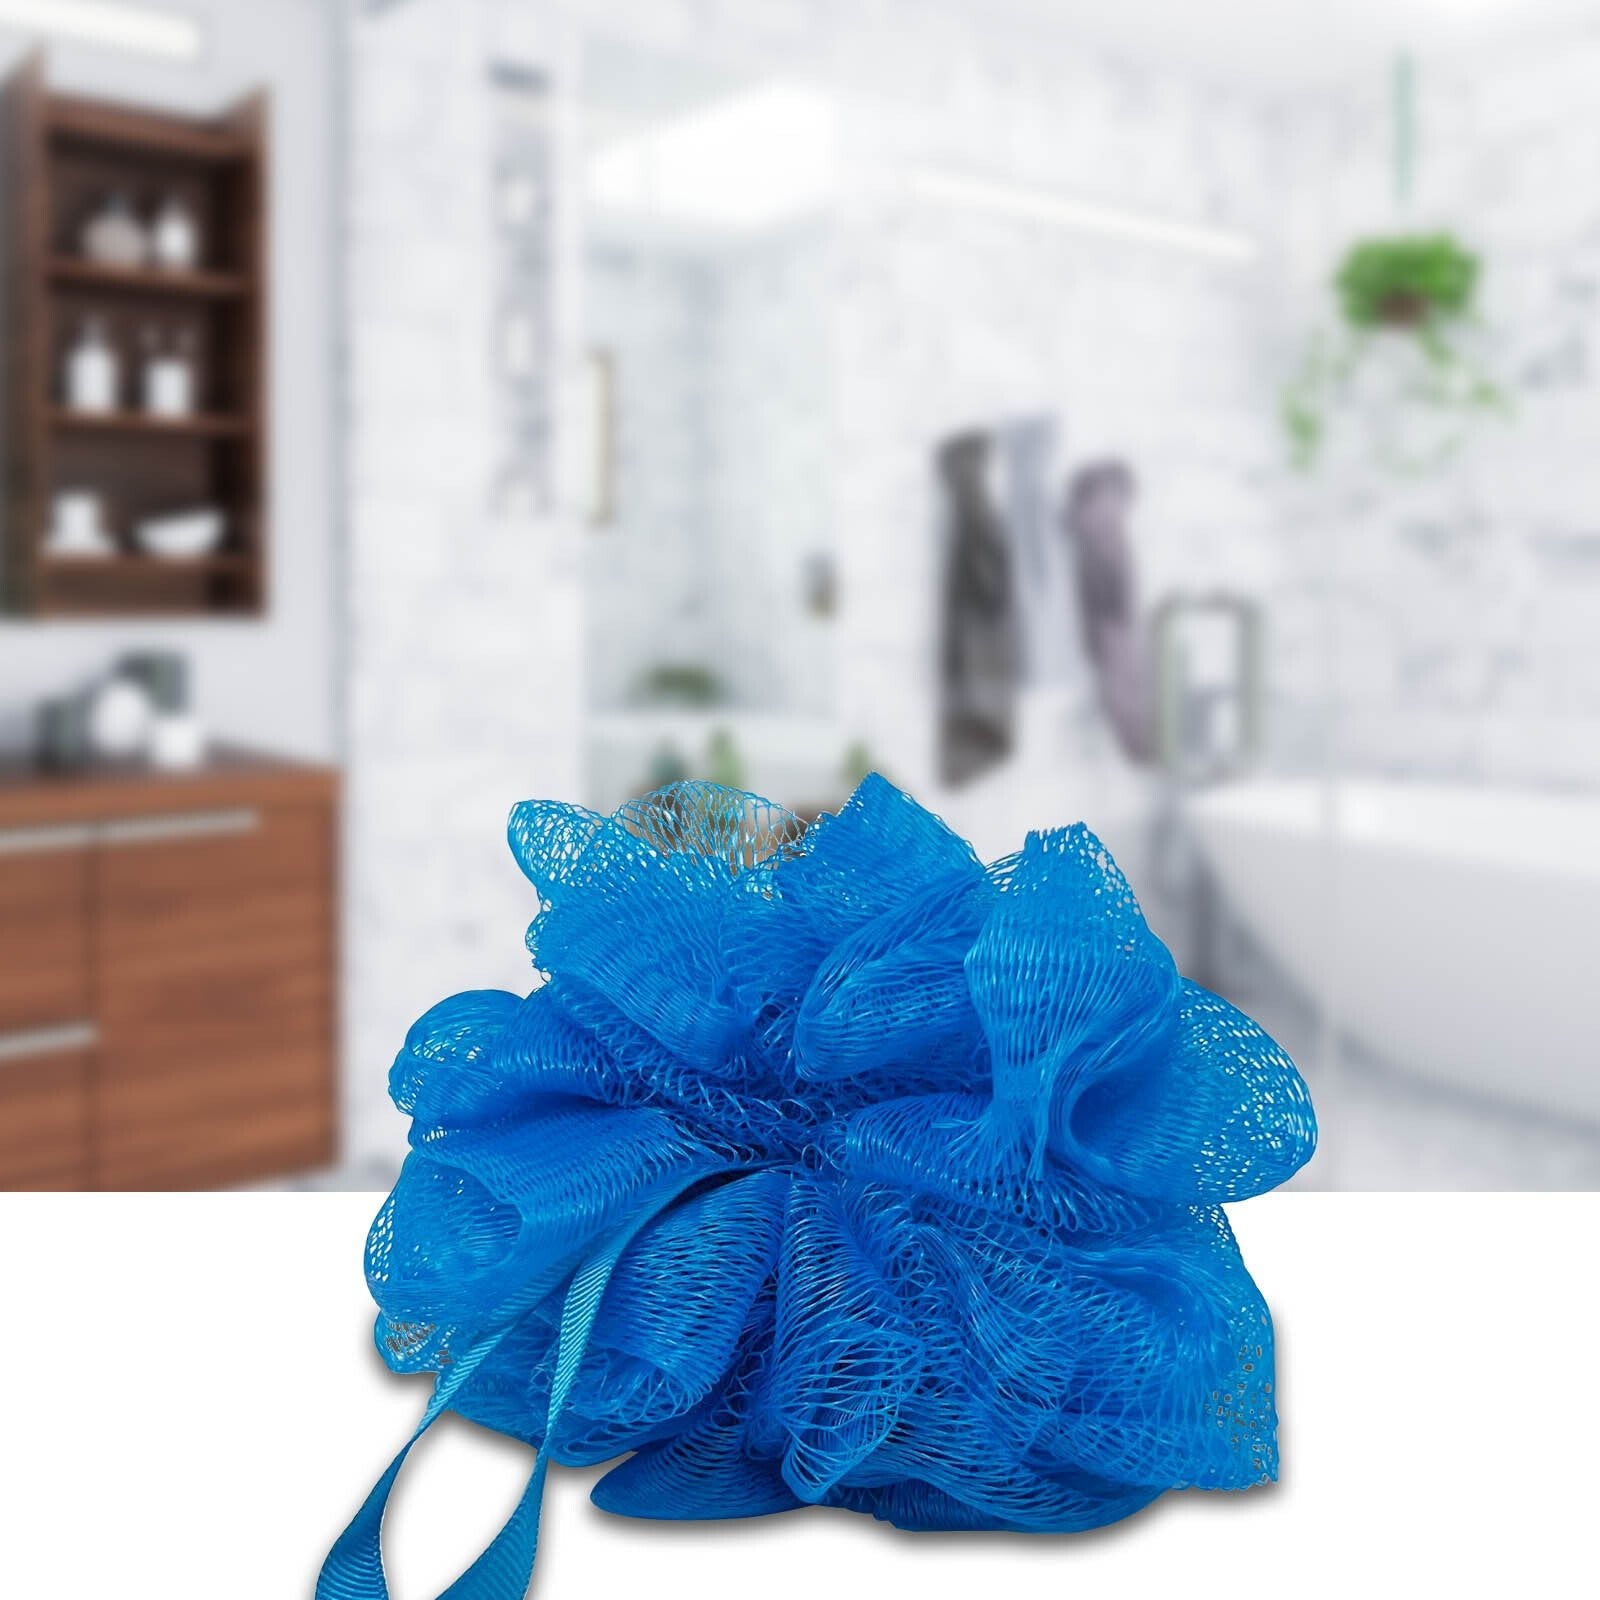 Blue Nylon Cleaning Puff on Blurred Bathroom Background